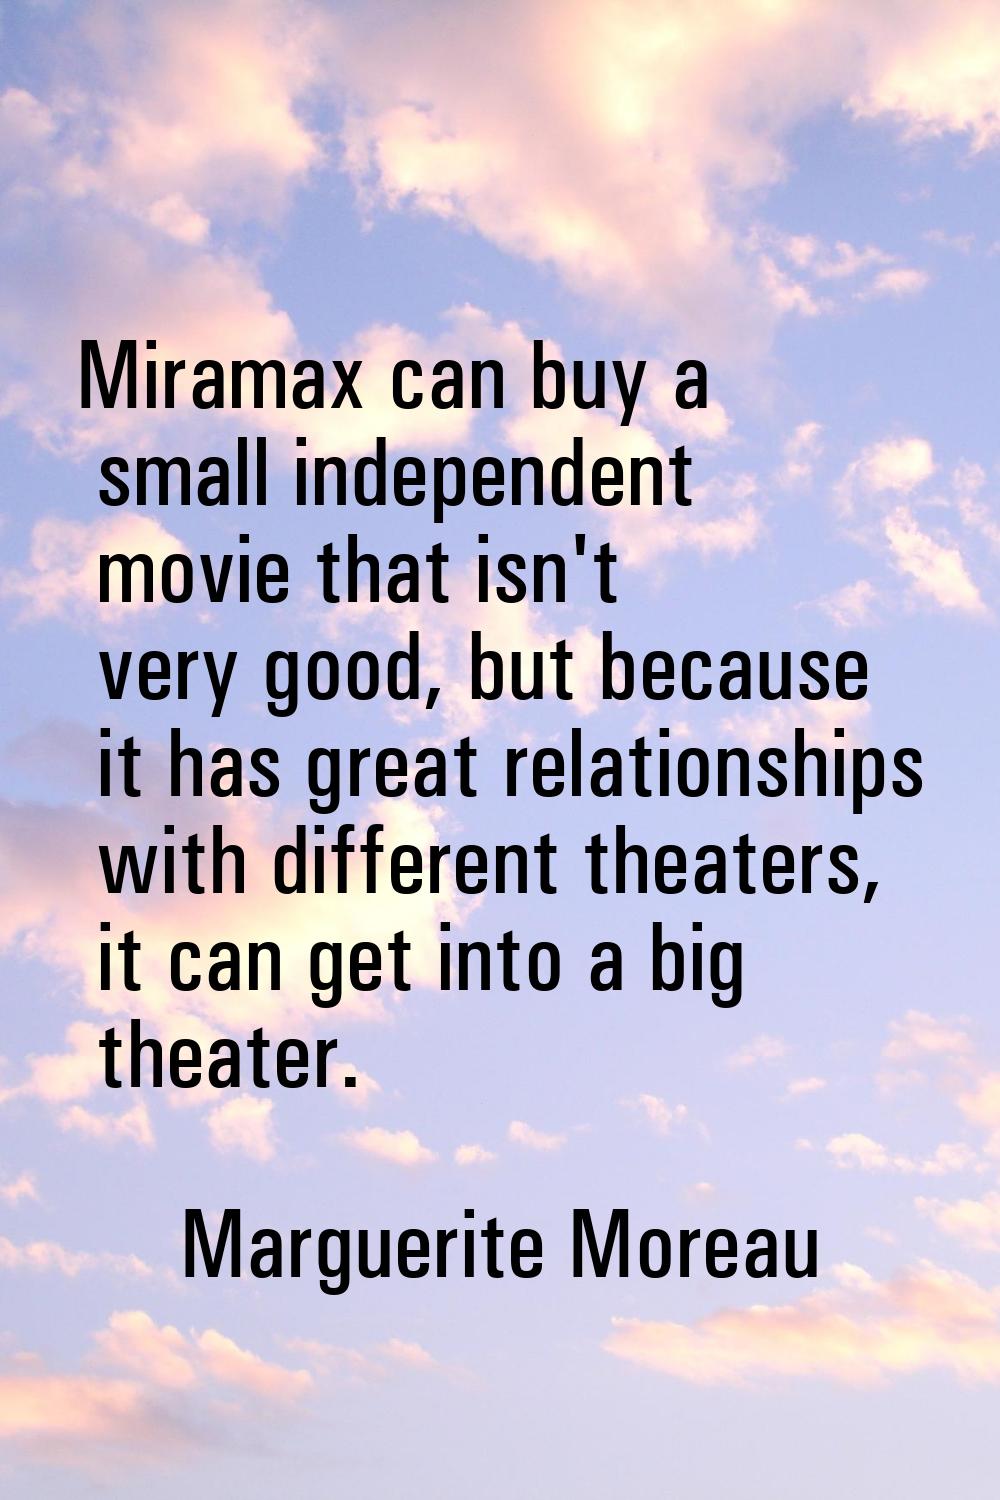 Miramax can buy a small independent movie that isn't very good, but because it has great relationsh